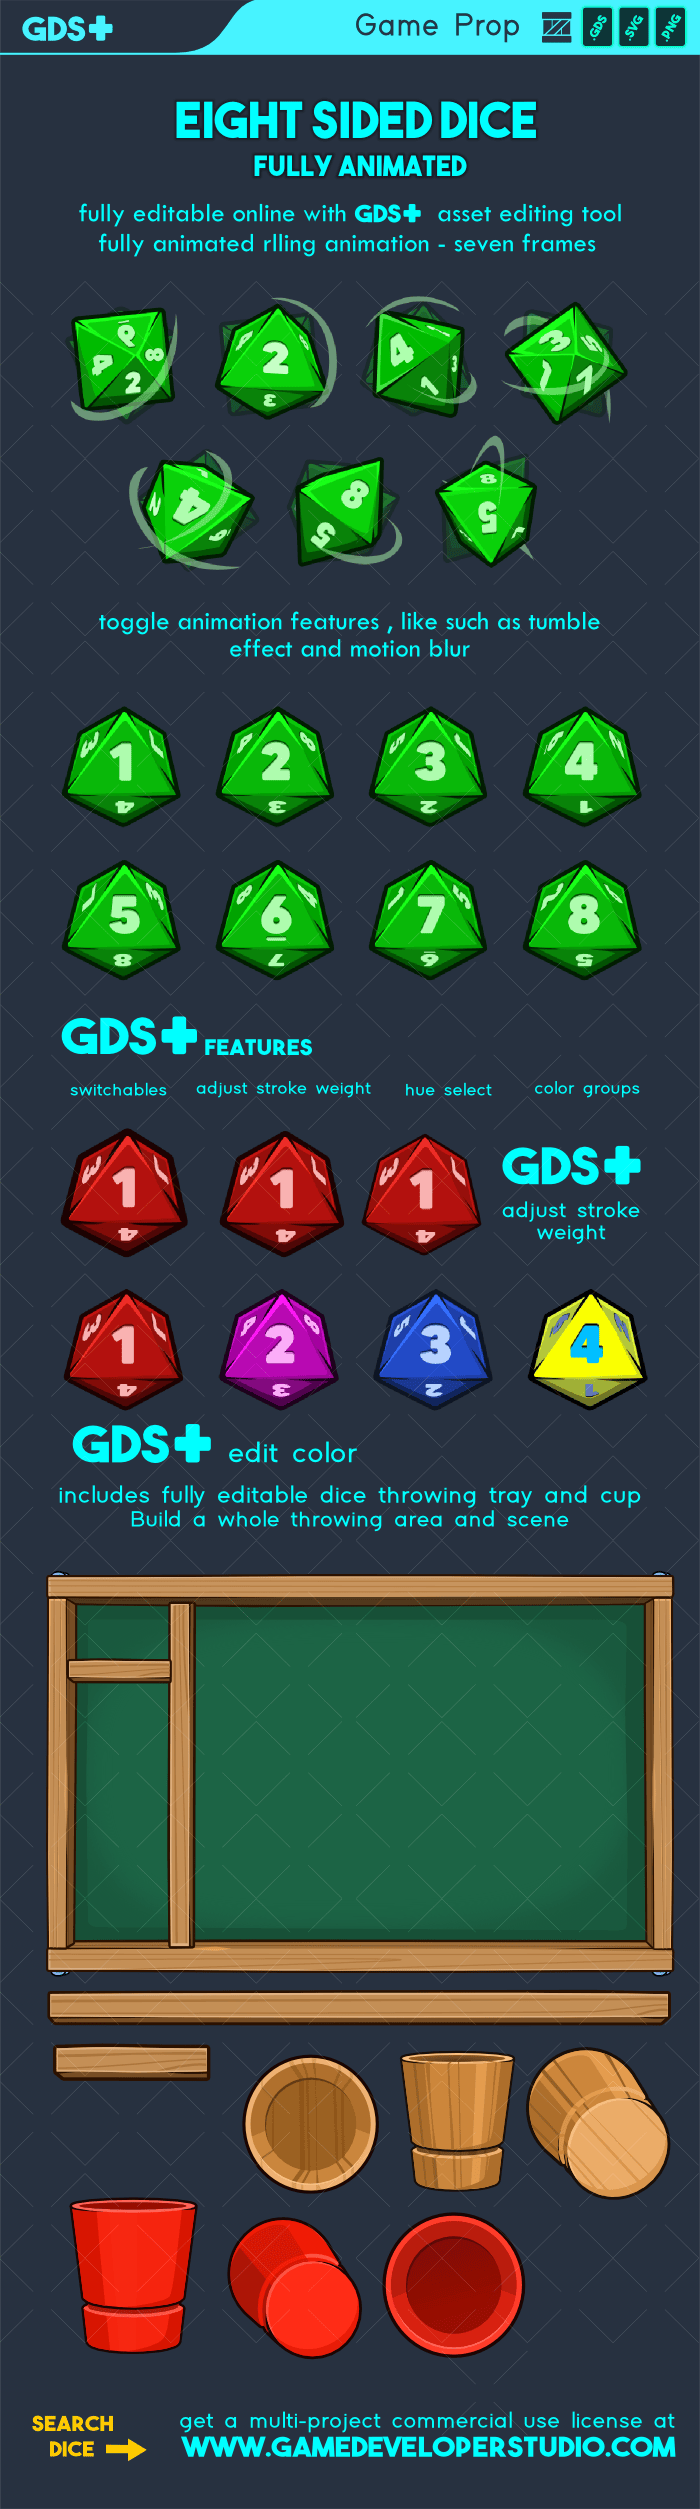 Fully animated eight side dice game sprite